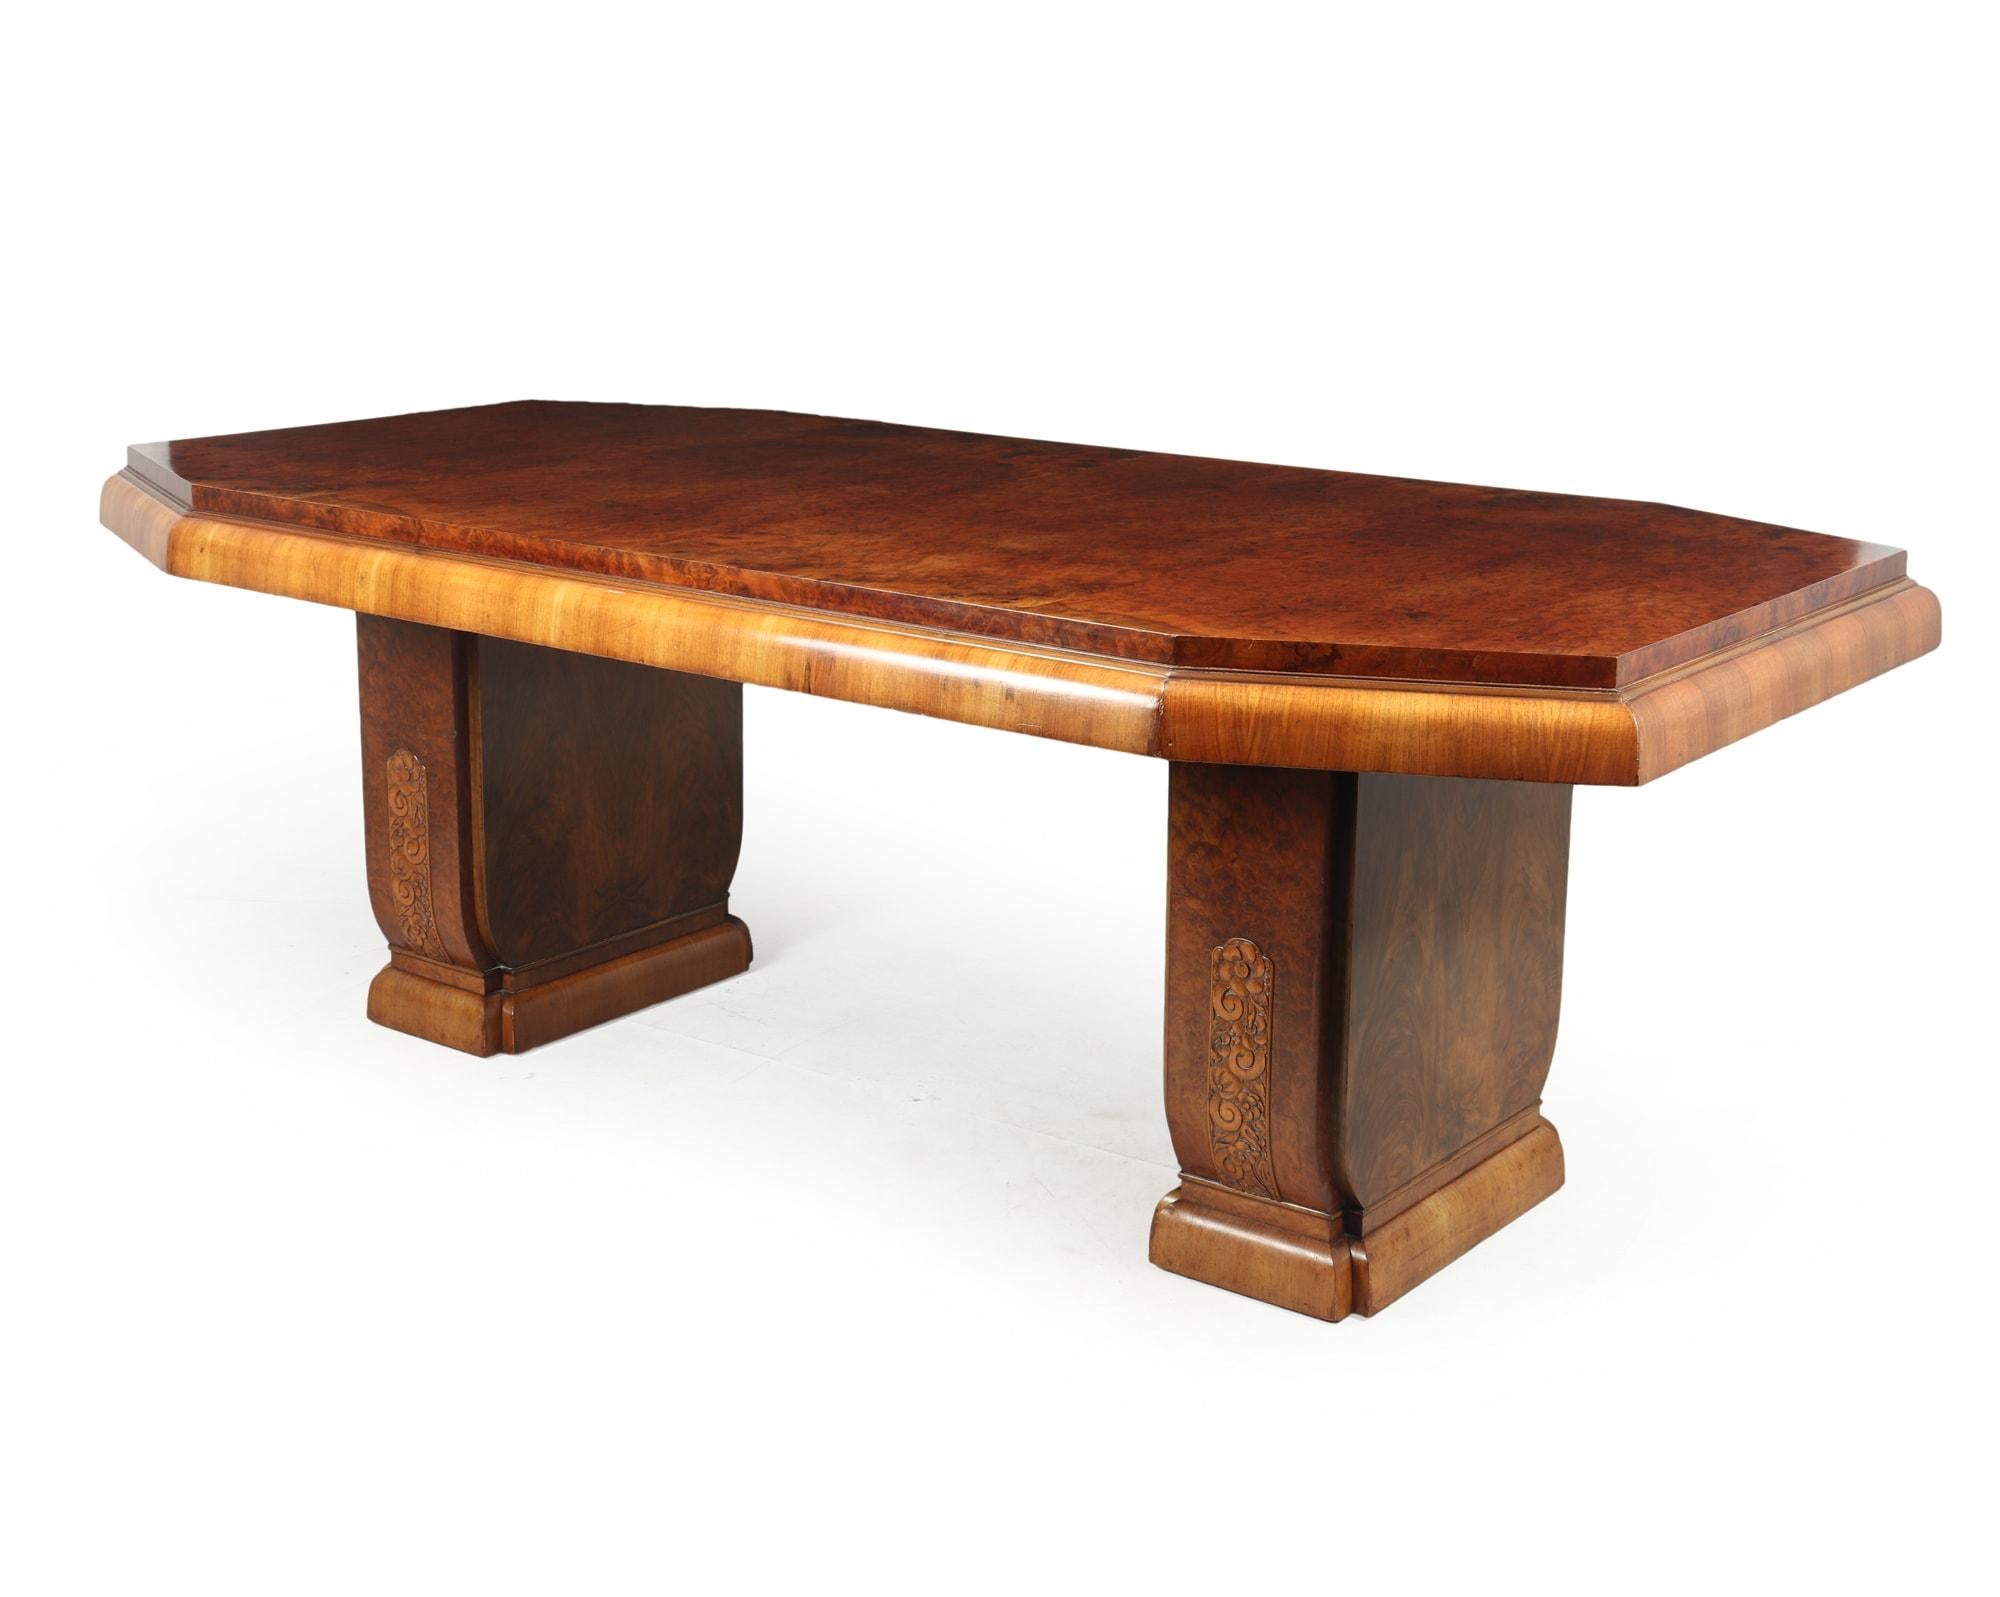 A large Art Deco dining table on a twin pedestal base in burr walnut with lovely figuring, carved motifs to the pedestal the table has been fully polished and is in excellent condition throughout

Age: 1930

Style: Art Deco

Material: Burr